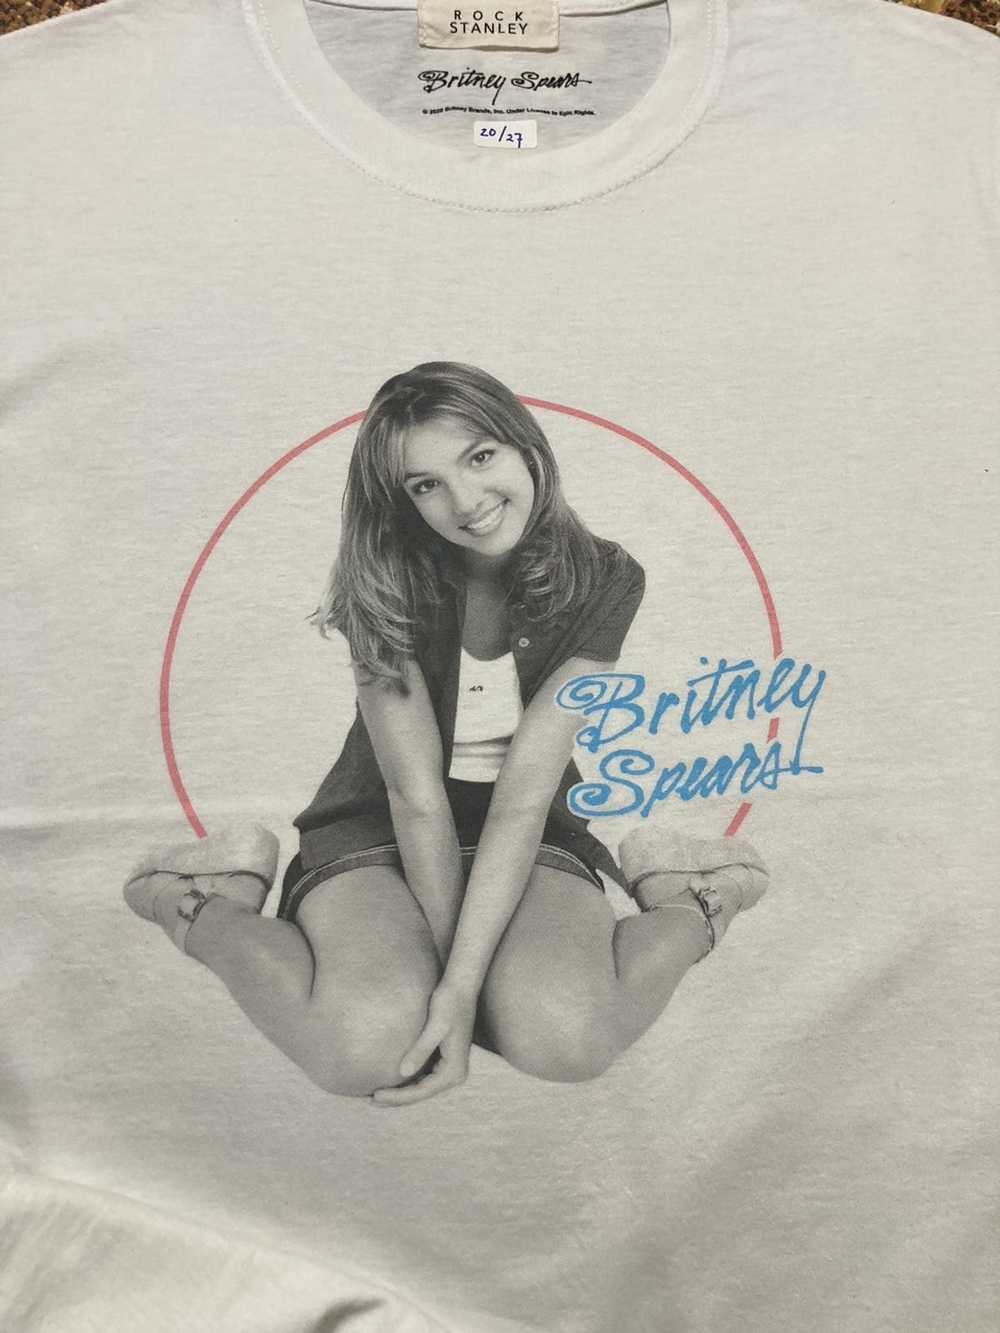 Band Tees Britney Spears photo tee - image 7